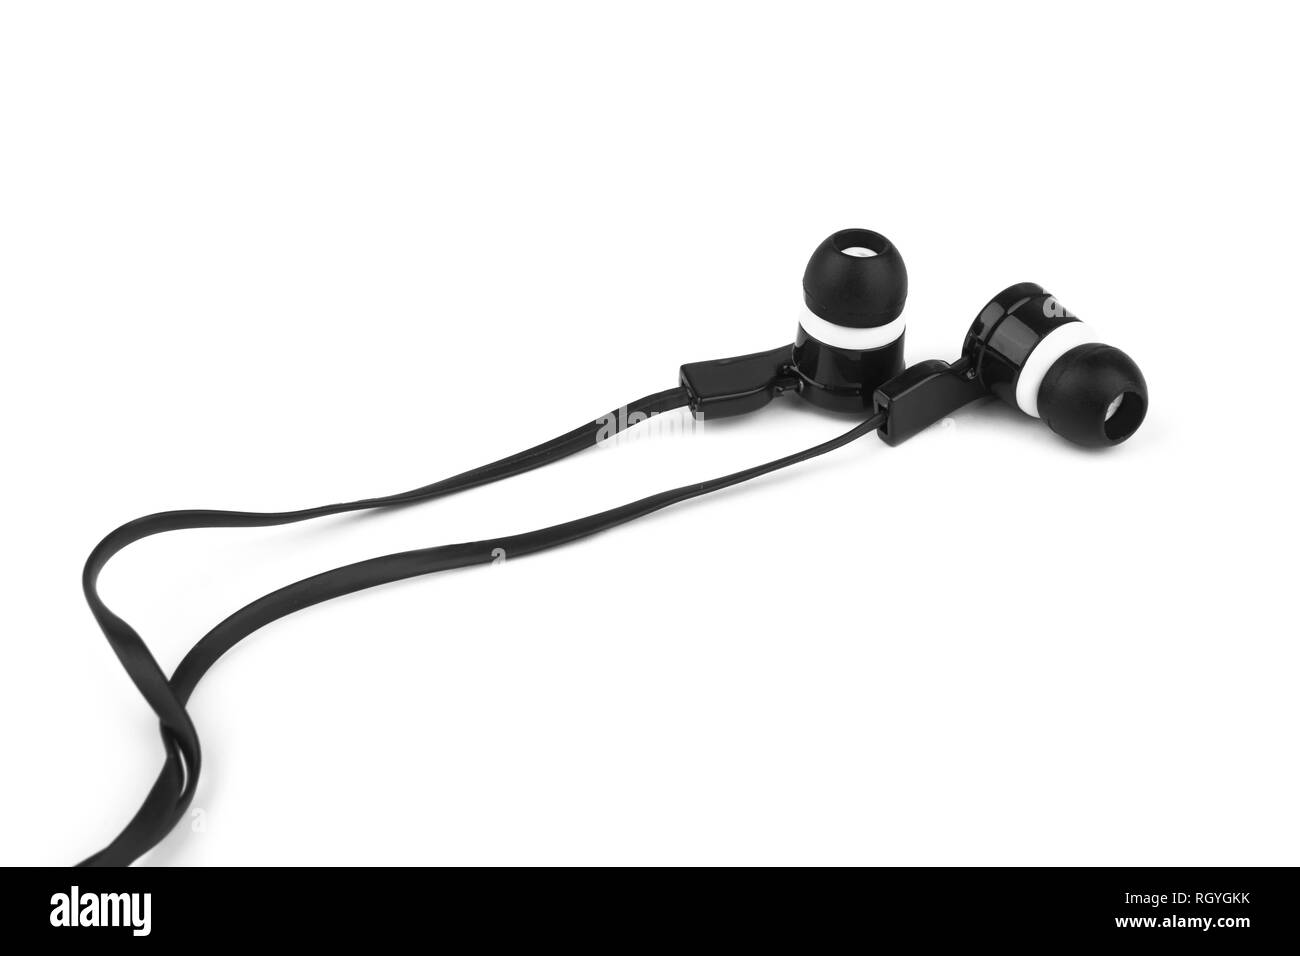 Modern portable audio earphones isolated on a white background Stock Photo